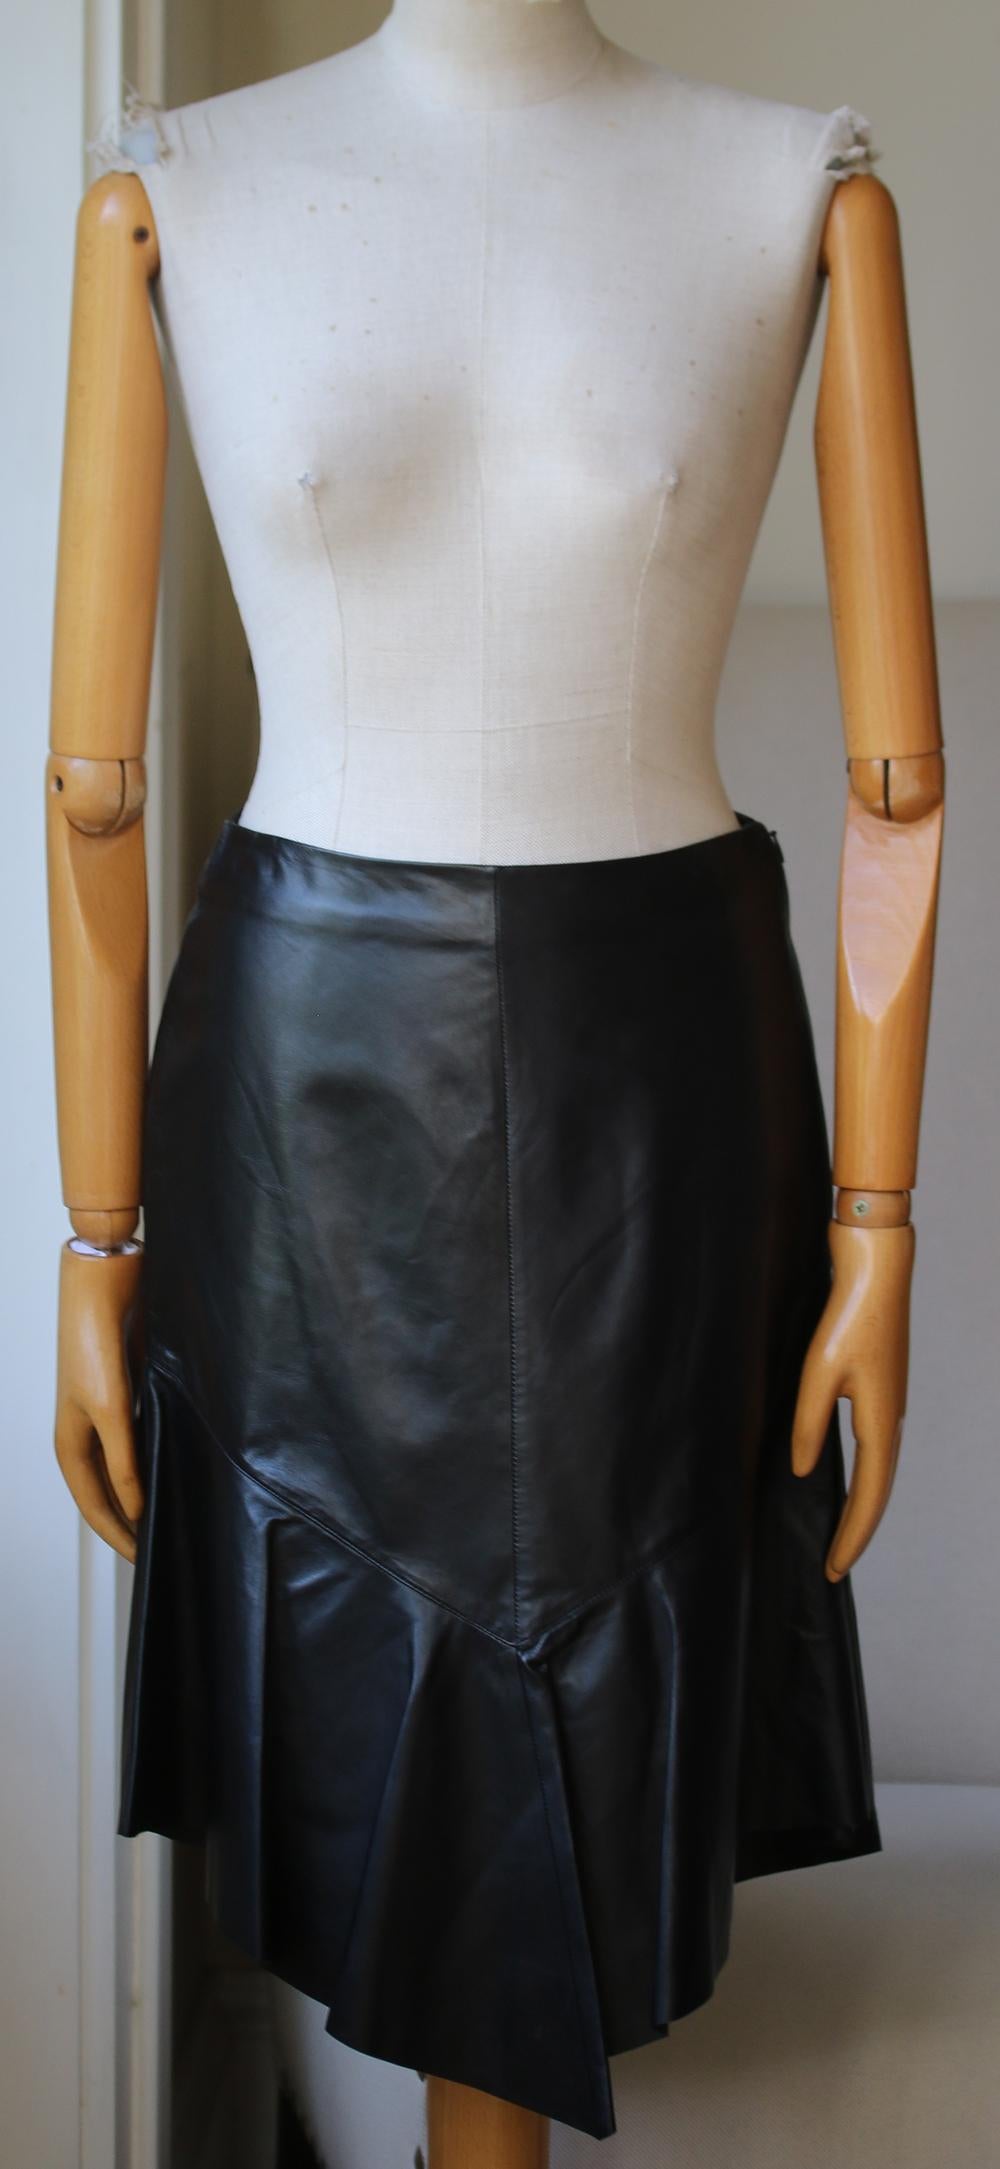 Black lambskin leather peplum skirt from Givenchy featuring a high waist, a concealed fastening and a pleated hem. 100% Lambskin leather. Ling: 60% acetate, 40% viscose. Colour: black.

Size: FR 38 (UK 10, US 6, IT 42)

Condition: As new condition,